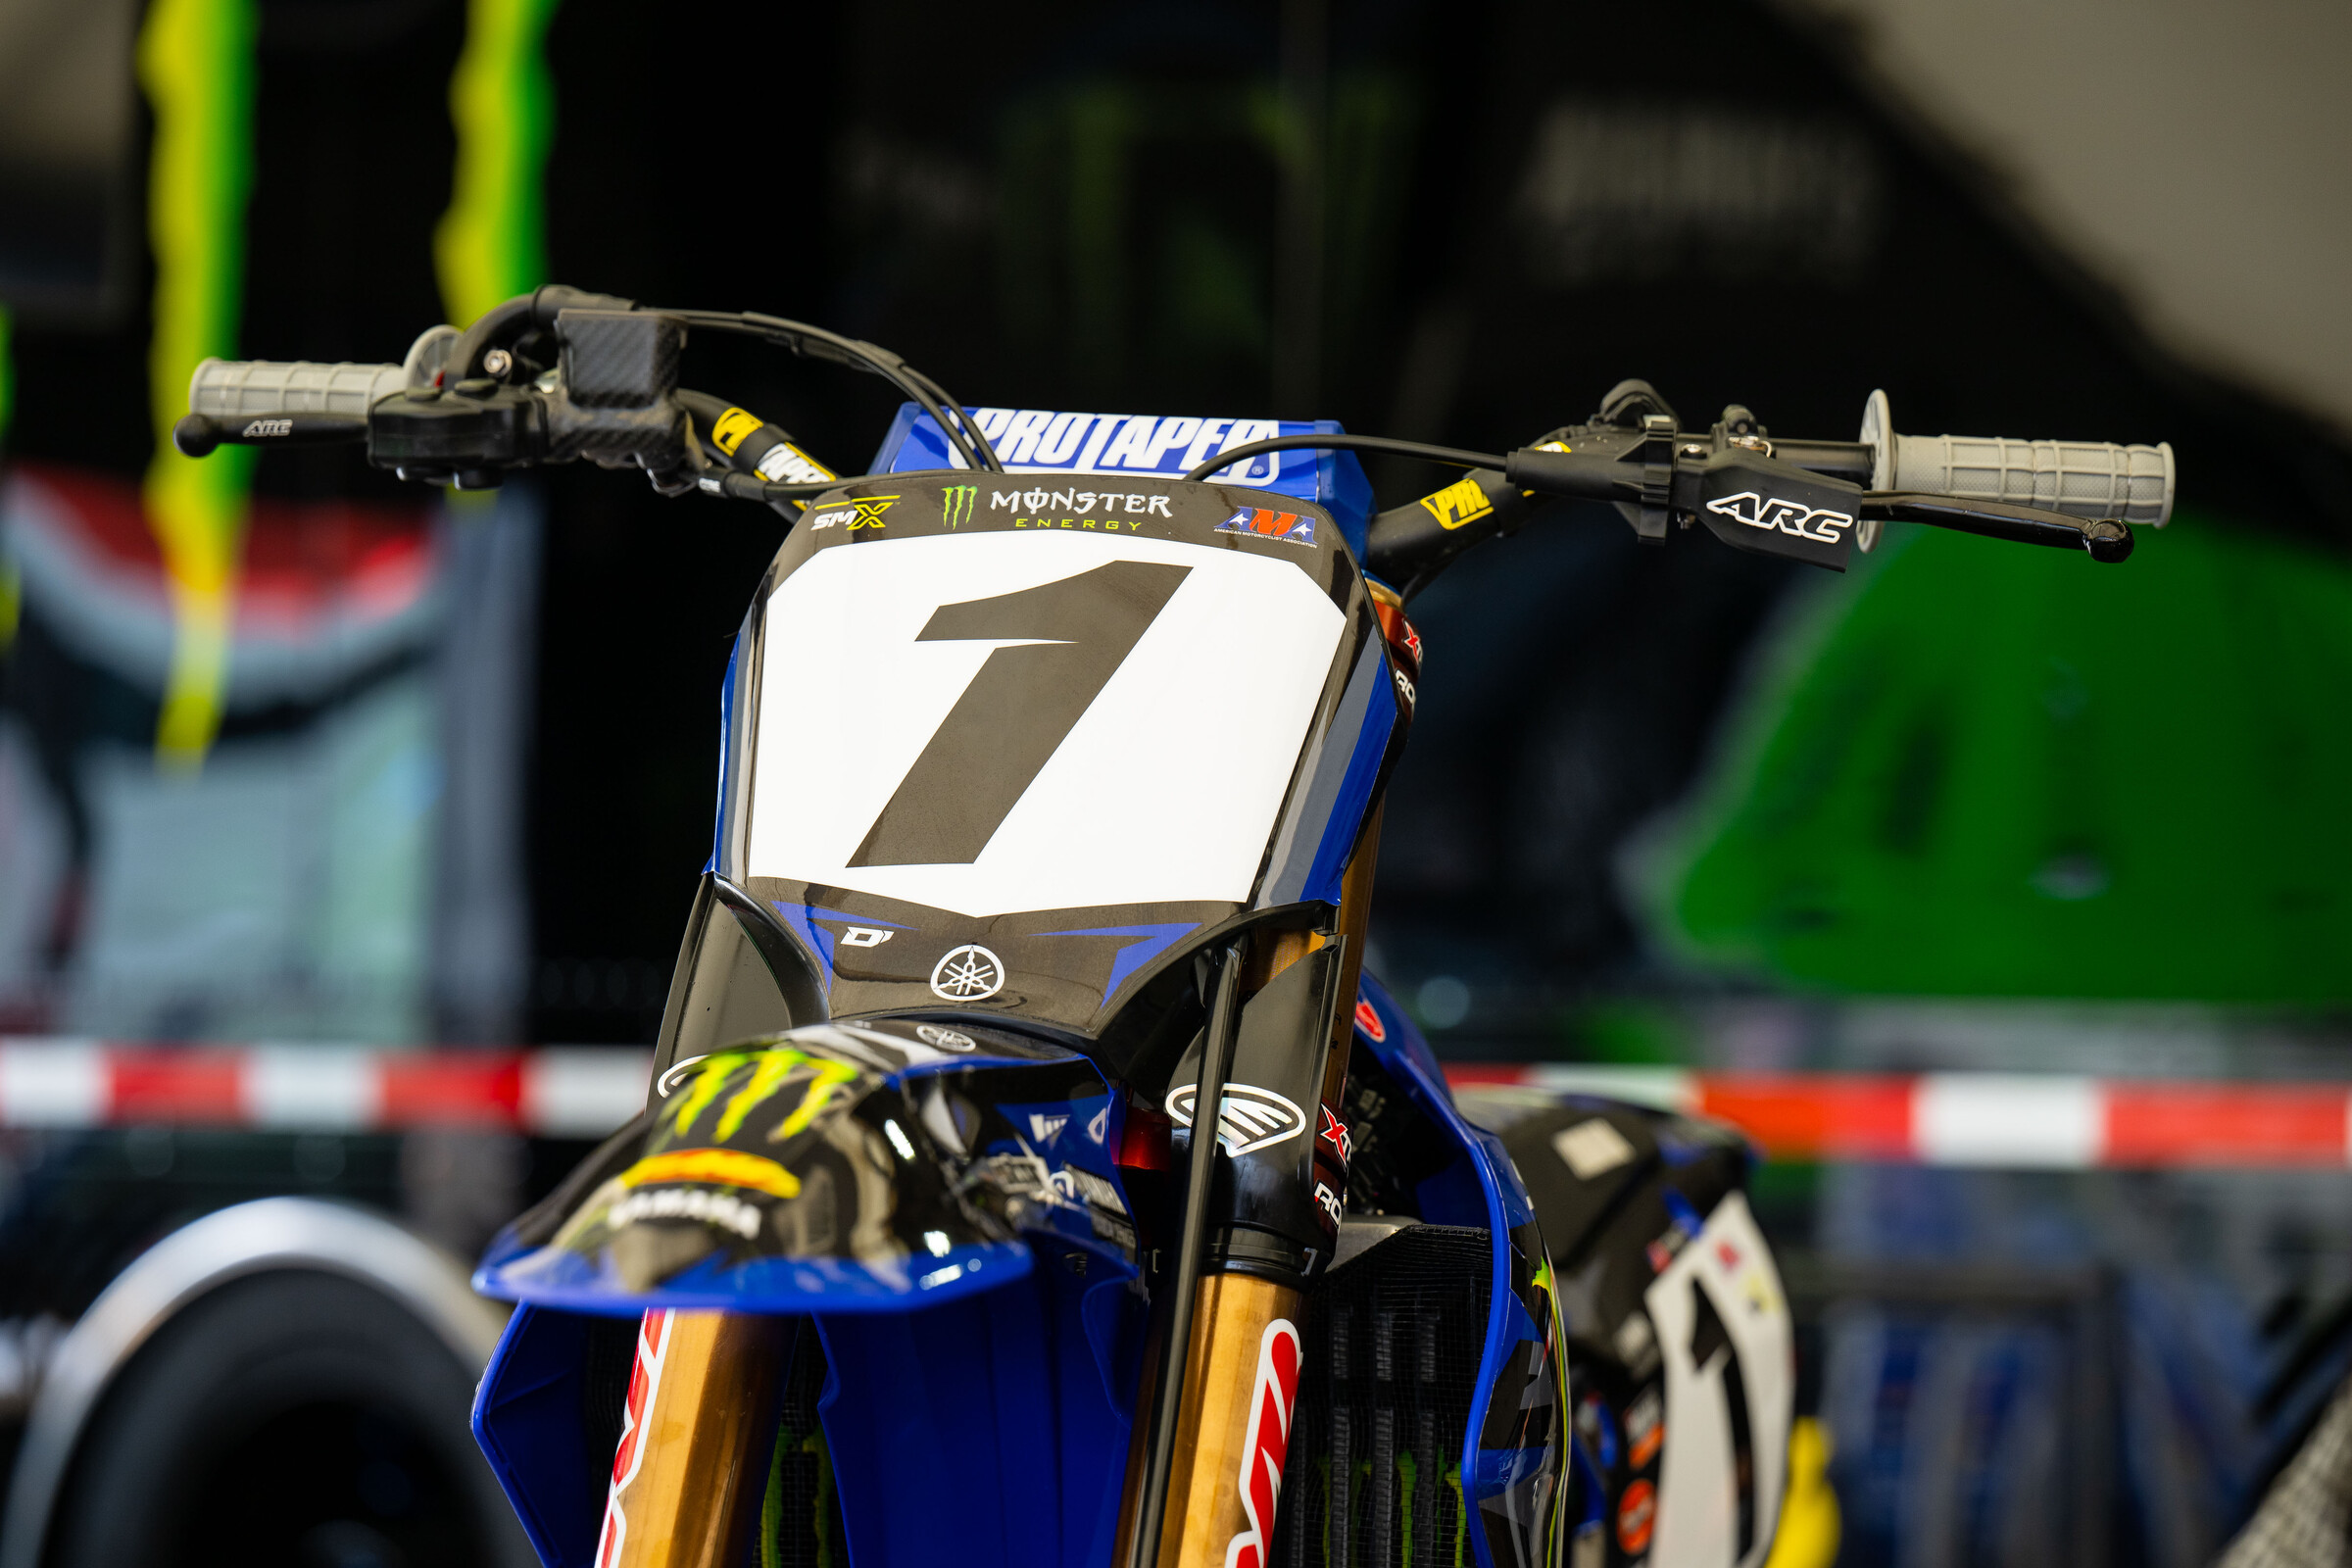 supercross 2022 livestream Eli Tomac: “Supercross-Only Correct Now…Leaving Option There For Moto & SMX”